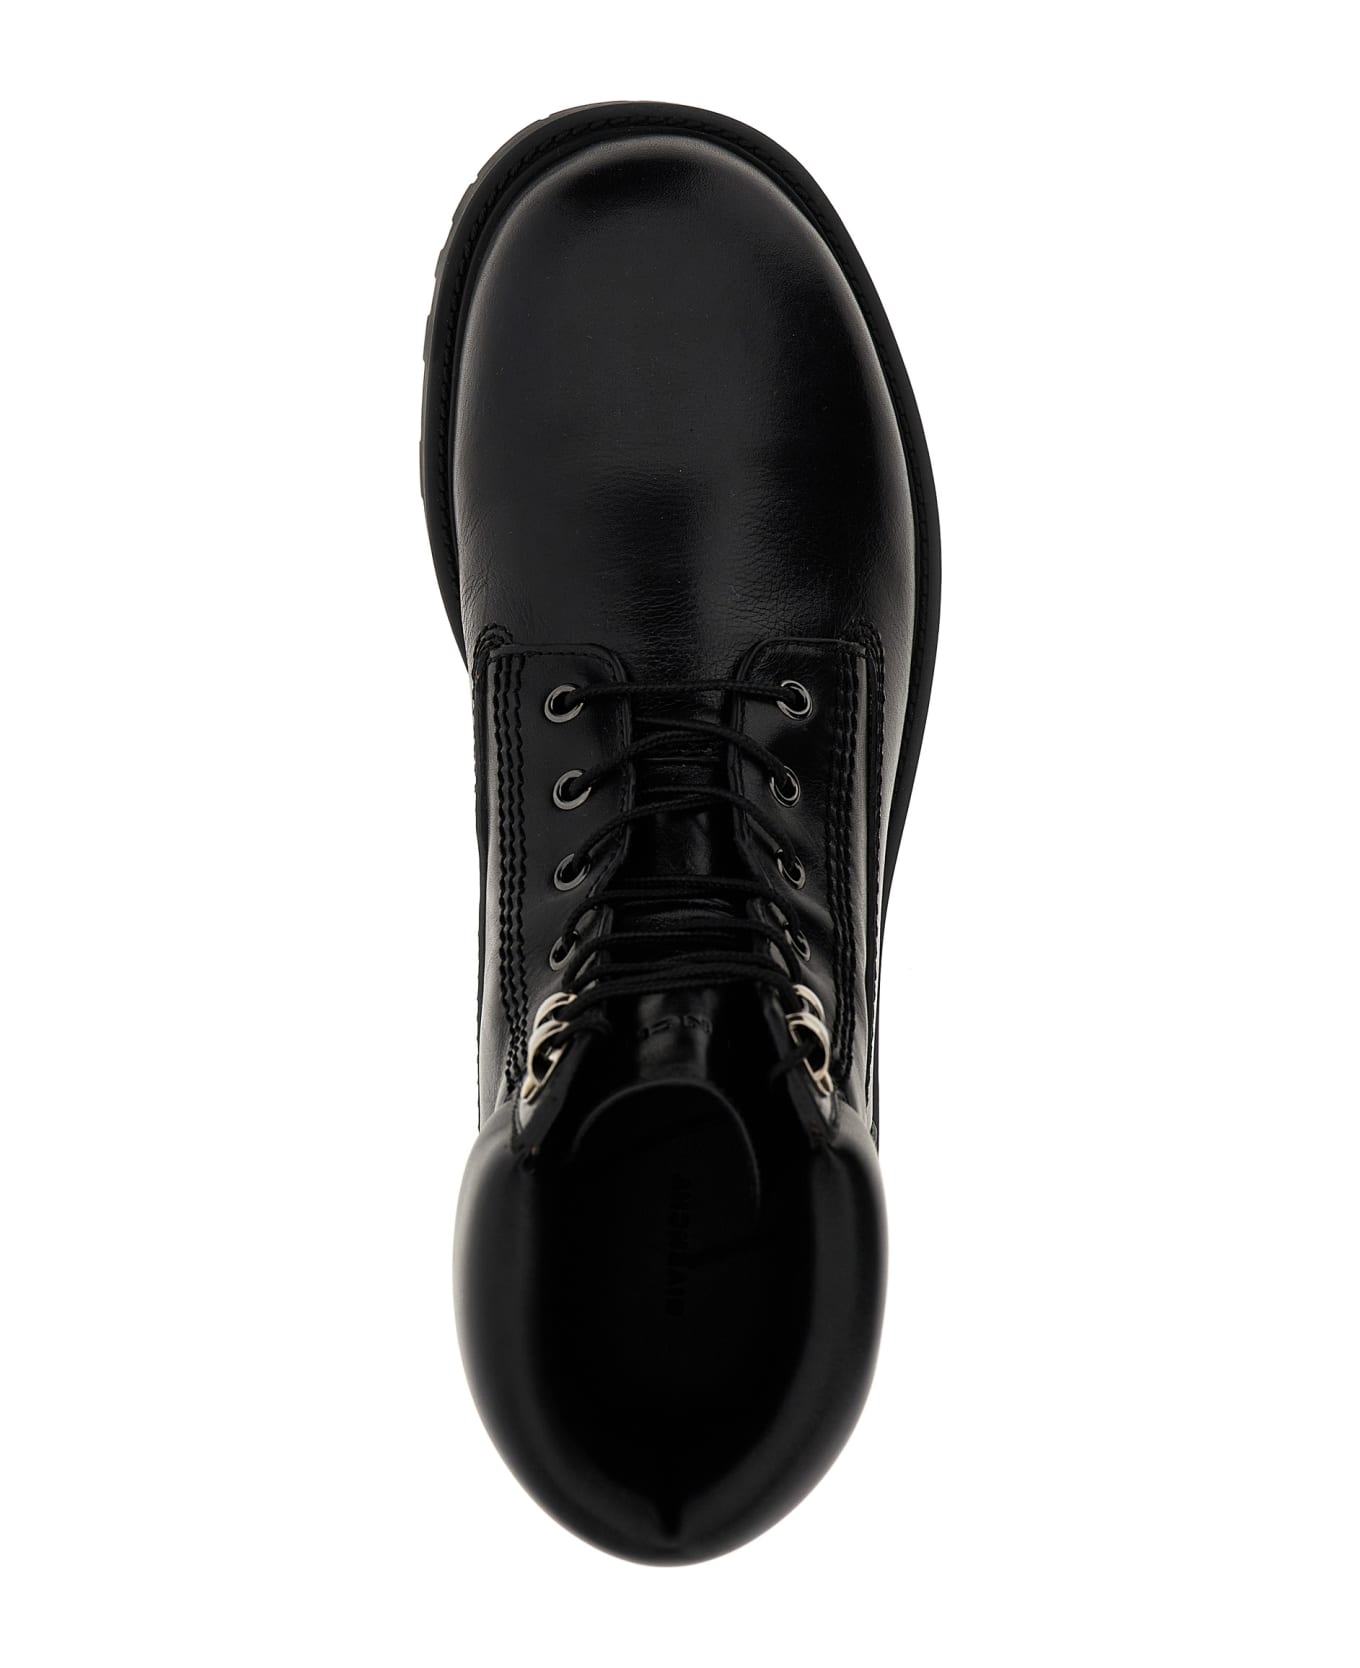 Givenchy Show Lace-up Boots - black ブーツ